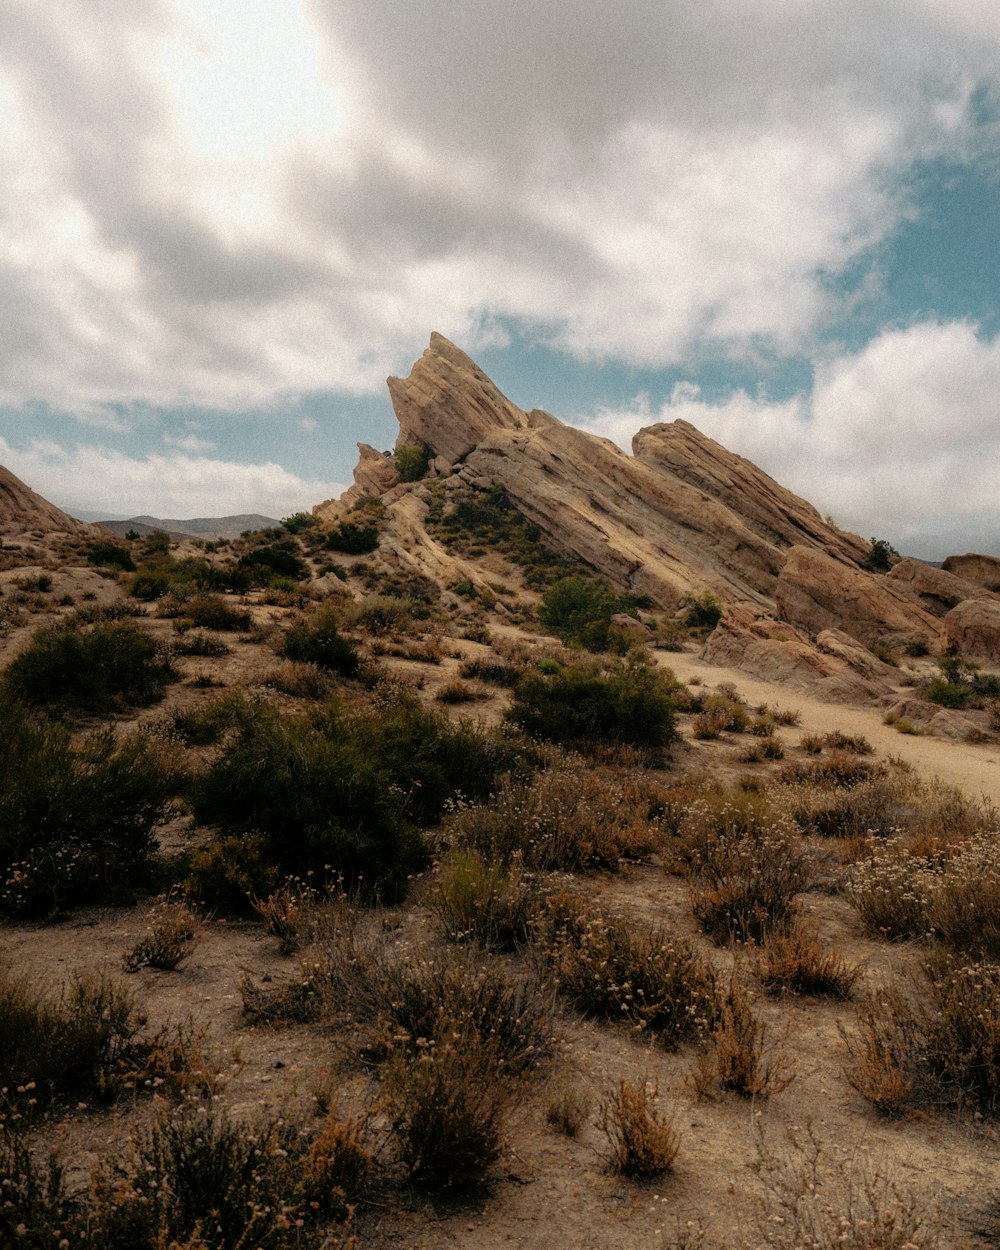 a desert landscape with a rocky mountain